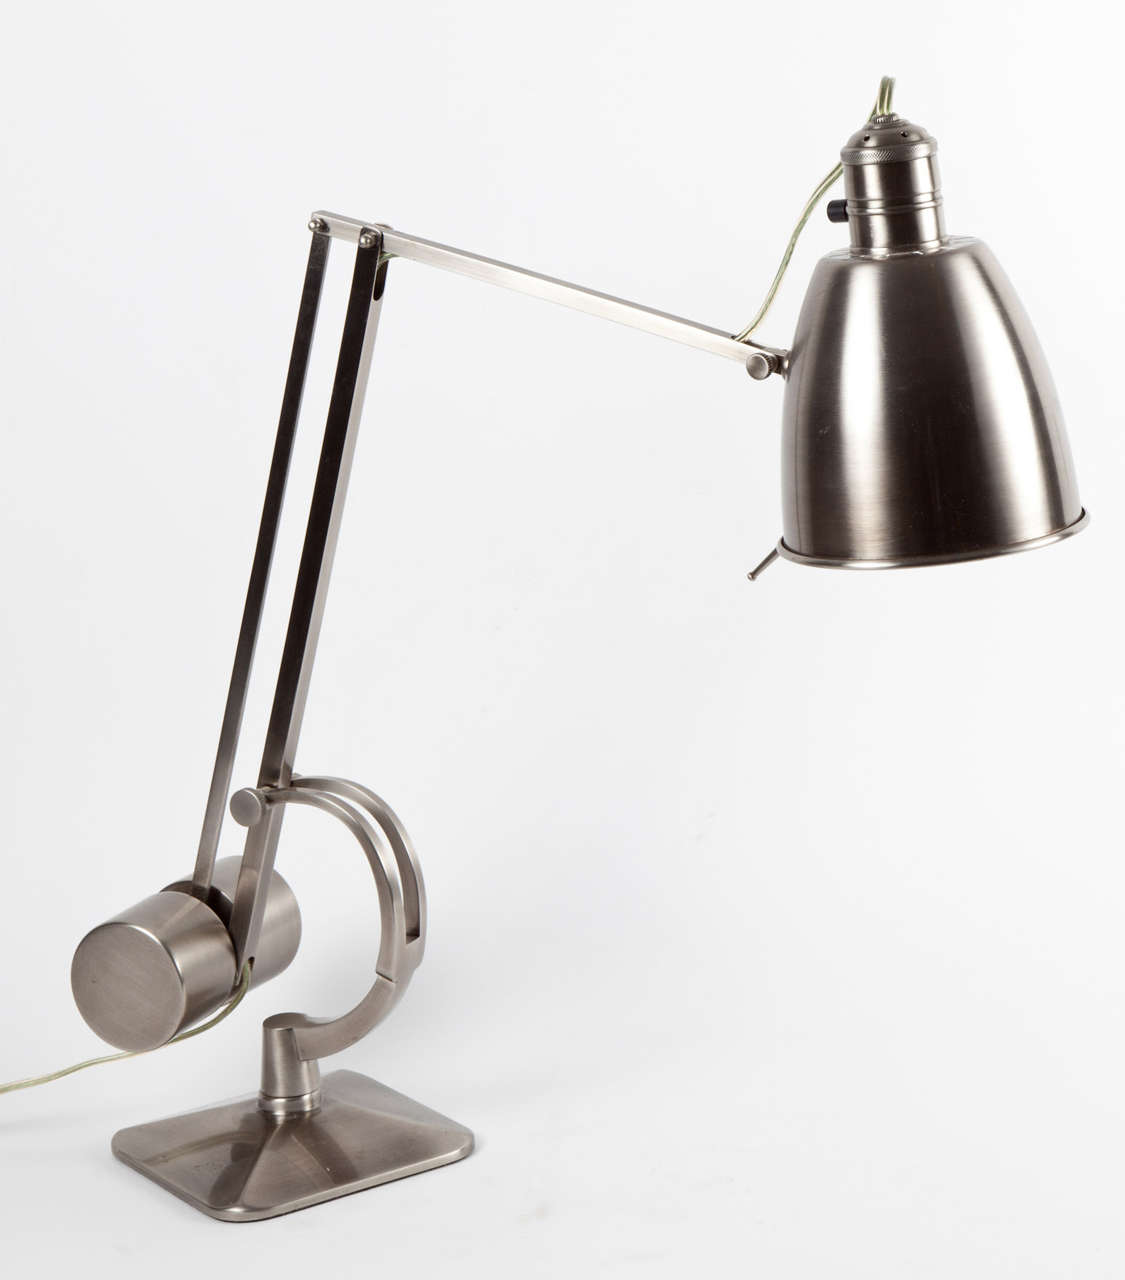 Vintage style counterweight desk lamp by Hadrill & Horstmann Limited, England, circa 1980-1990. Brushed aluminum finish. Adjustable arm. Wired for U.S. and takes a standard bulb, 75 watts max.